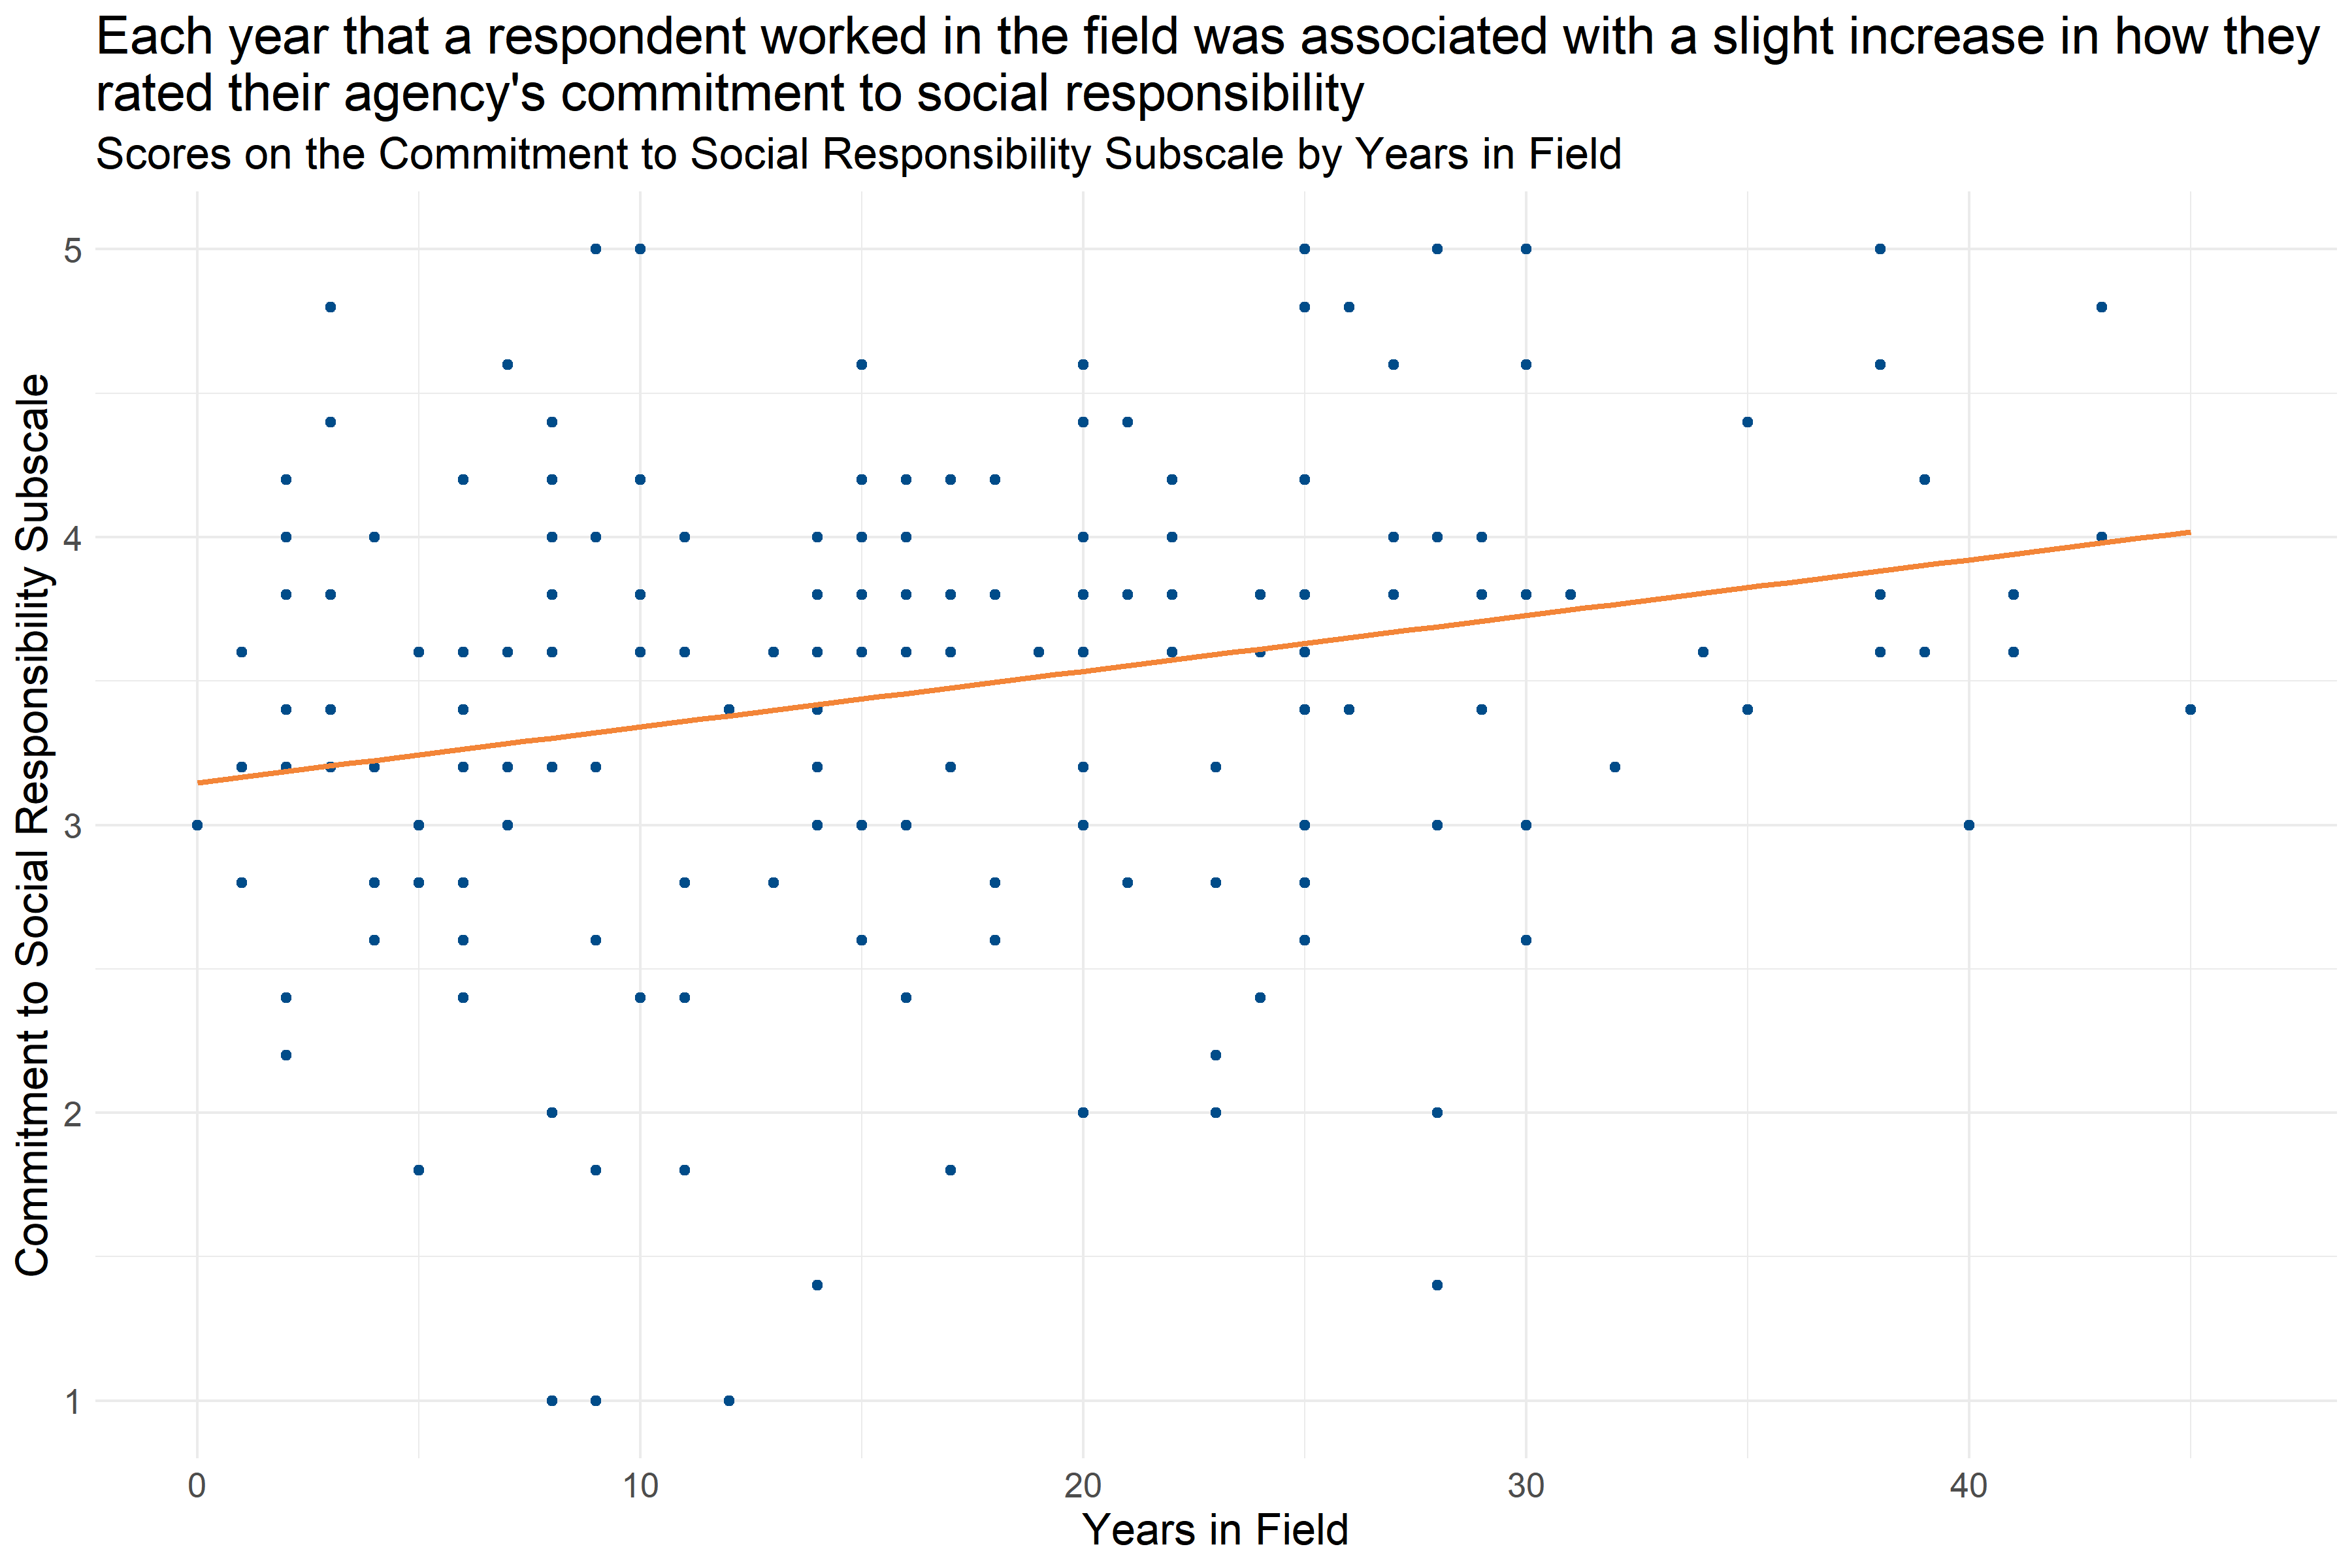 Scatter plot of Years in Field and Commitment to Social Responsibility Score